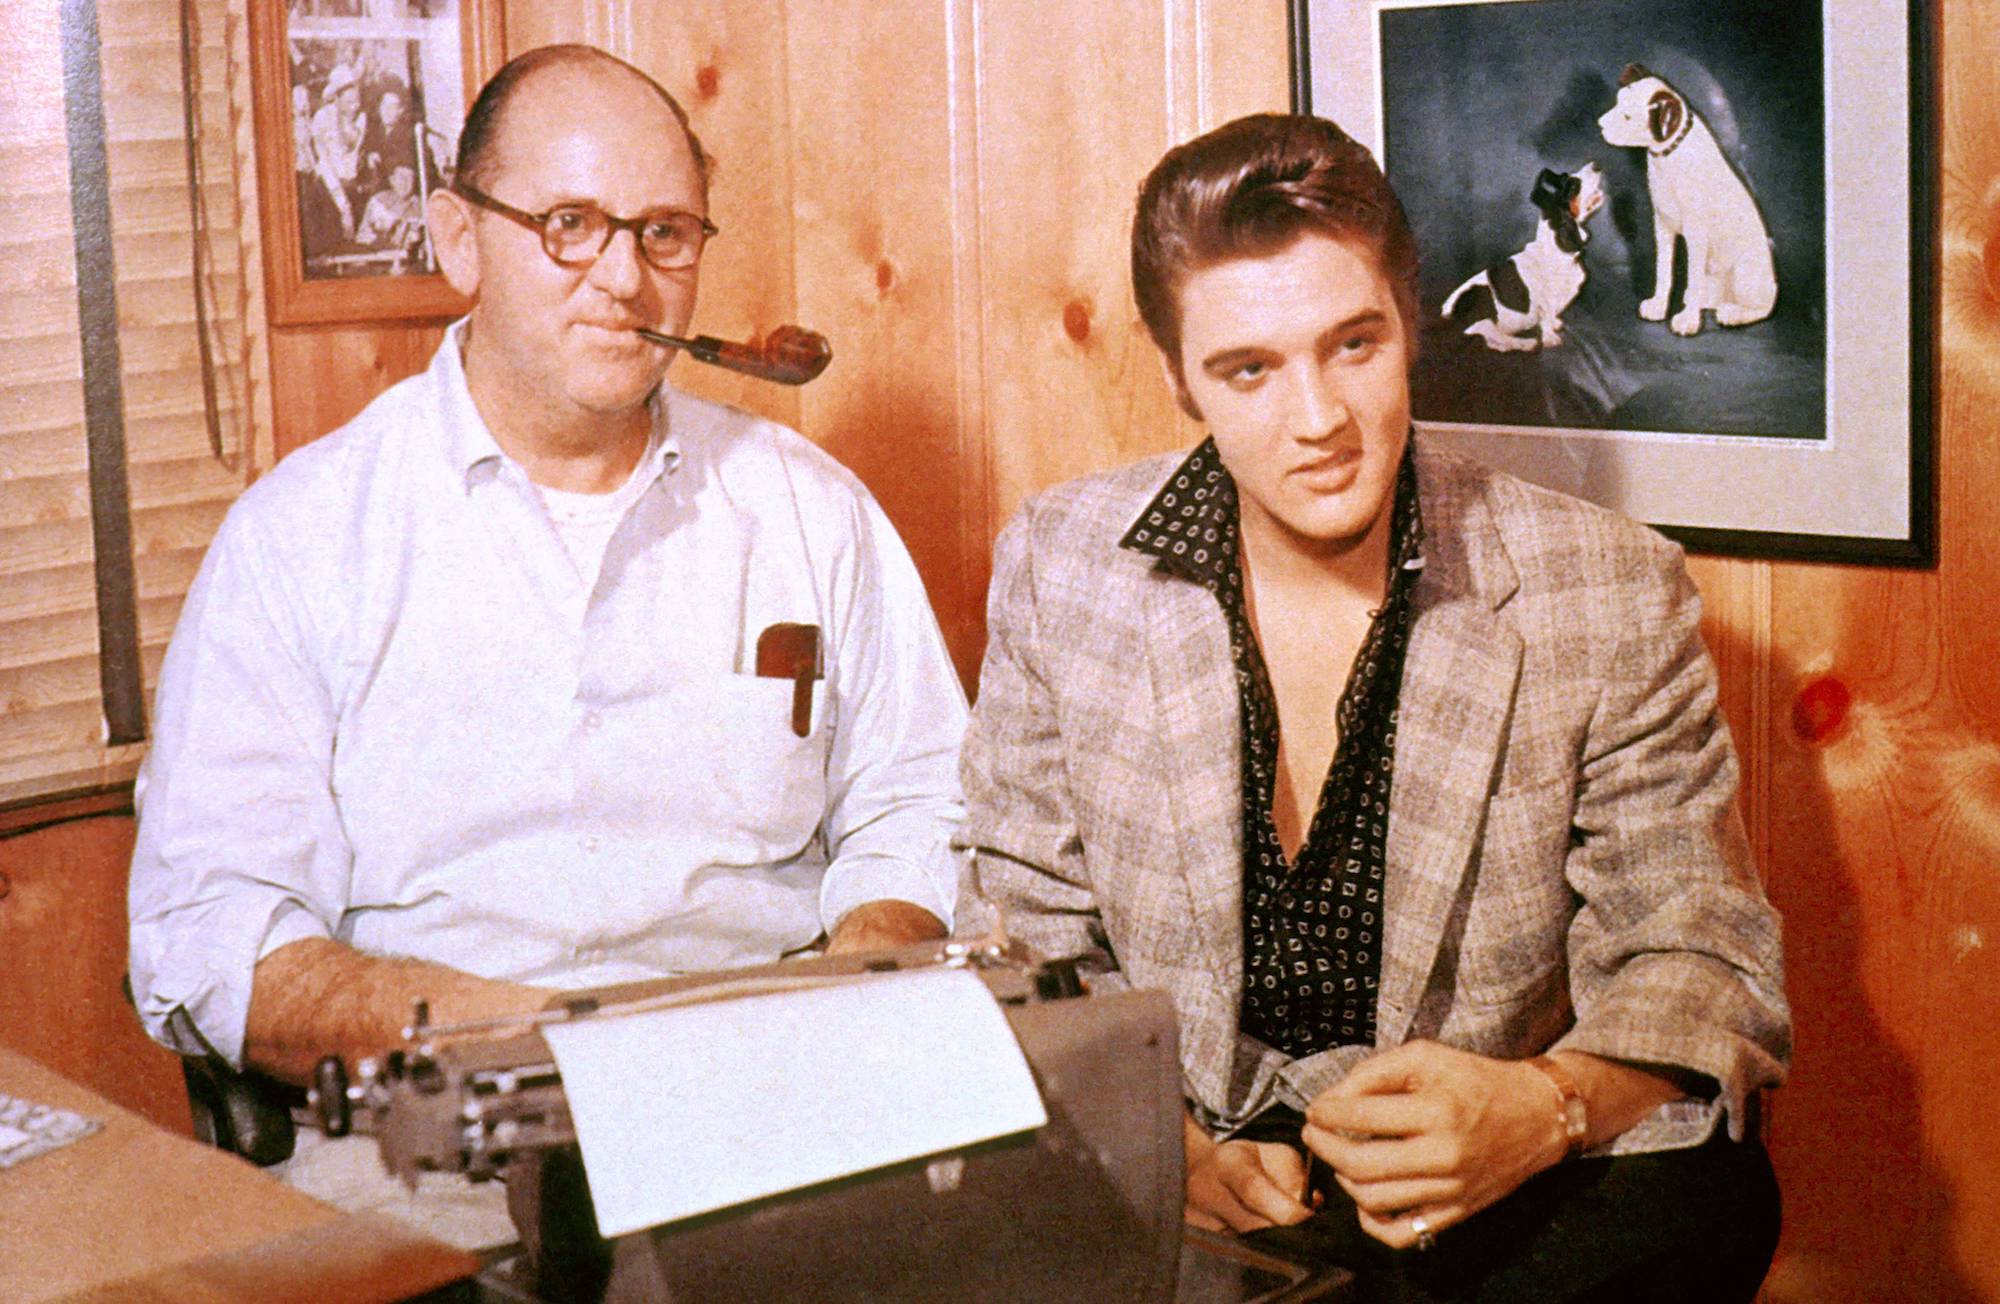 (L-R) Colonel Tom Parker, smoking a pipe, and Elvis Presley smiling